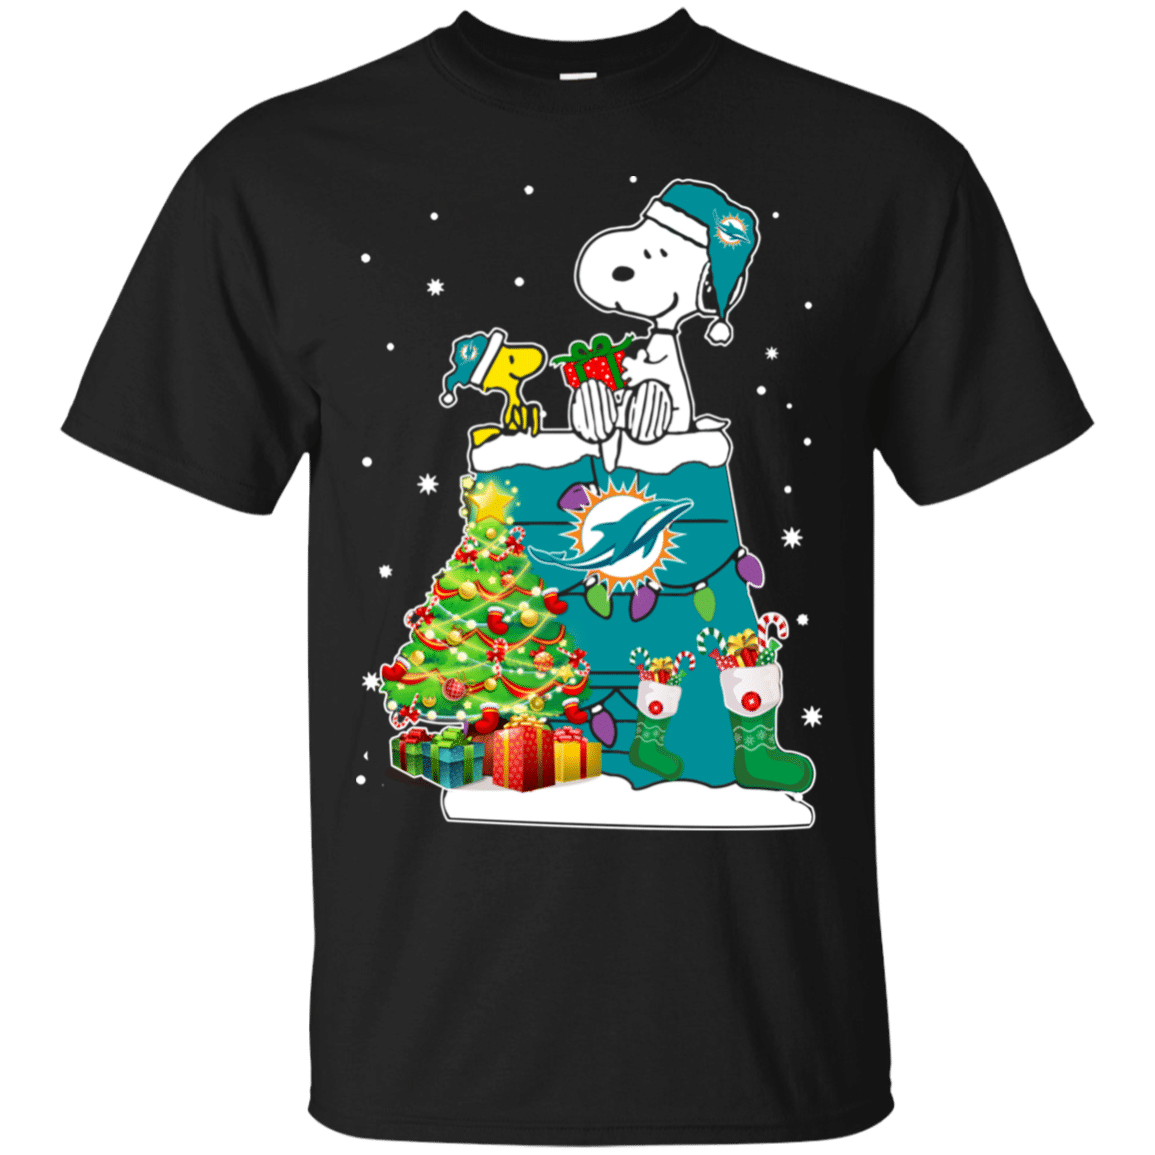 Miami Dolphins Shop - Check out this awesome Miami Dolphins Snoopy Woodstock Christmas Shirt Cotton Shirt 1